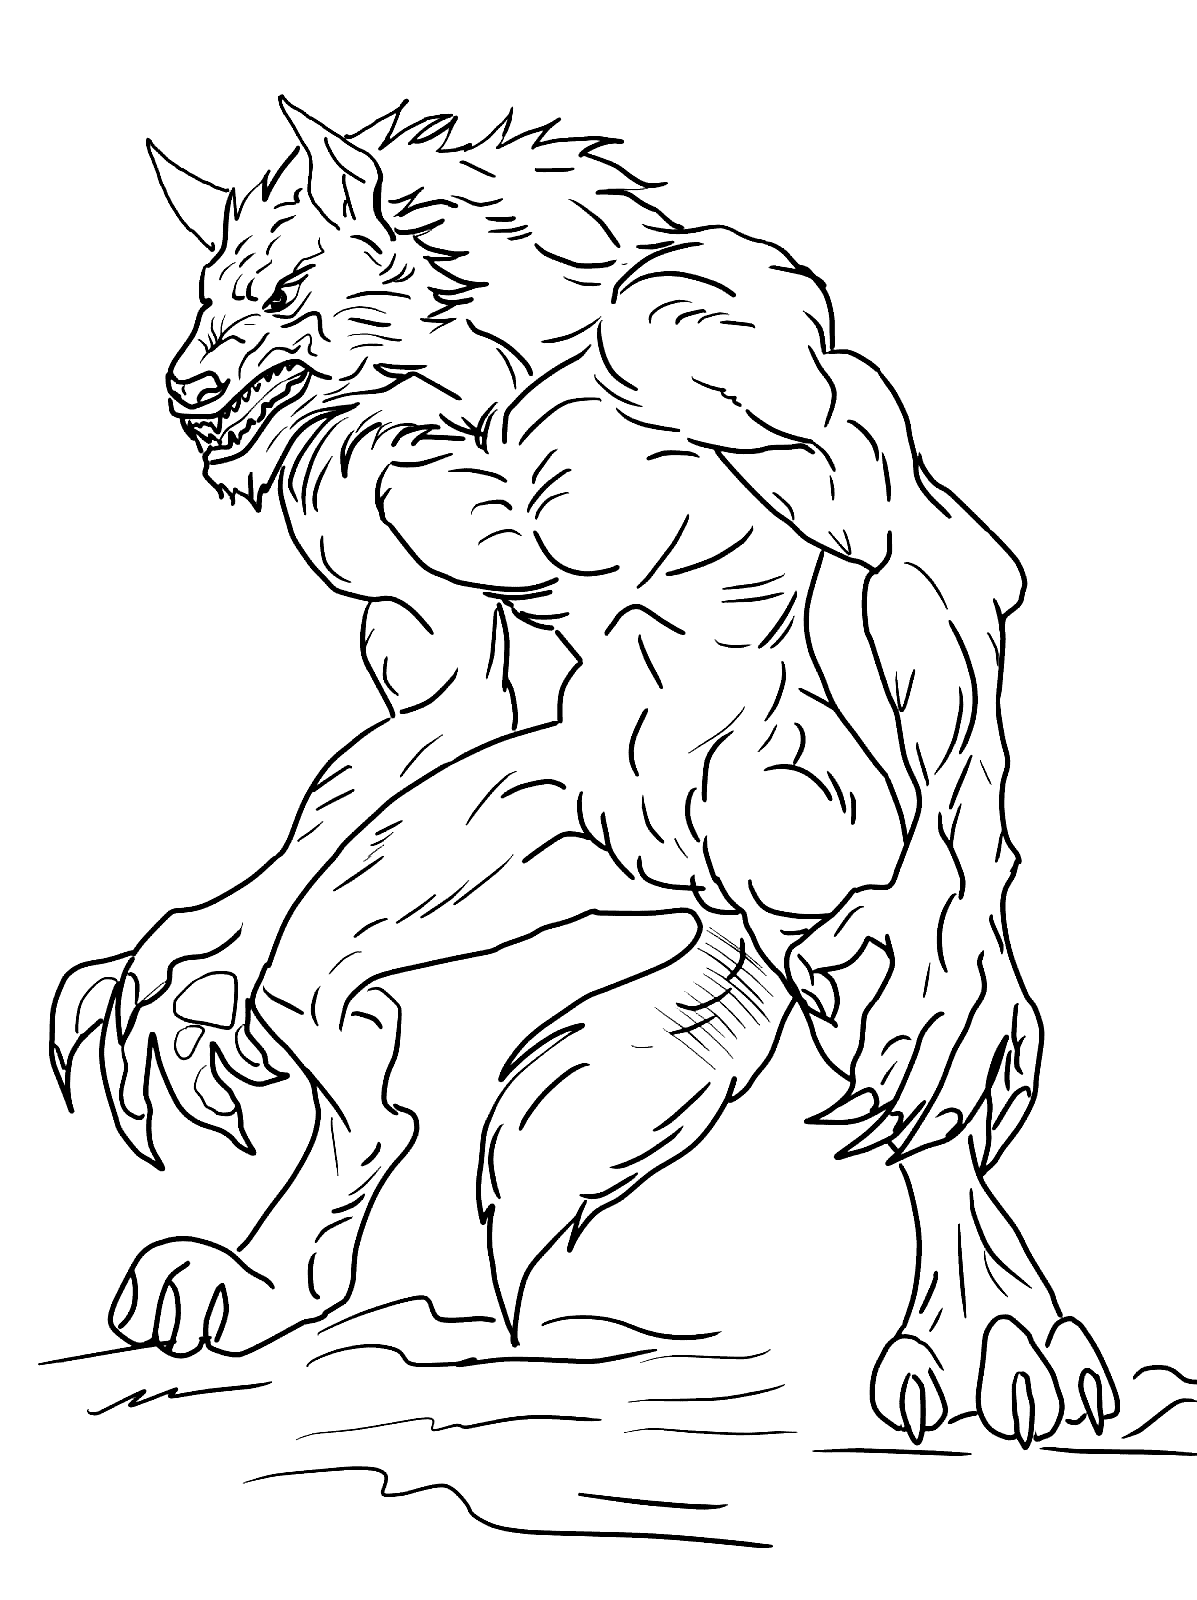 Free Scary Werewolf Free Coloring Pages - Coloring Cool